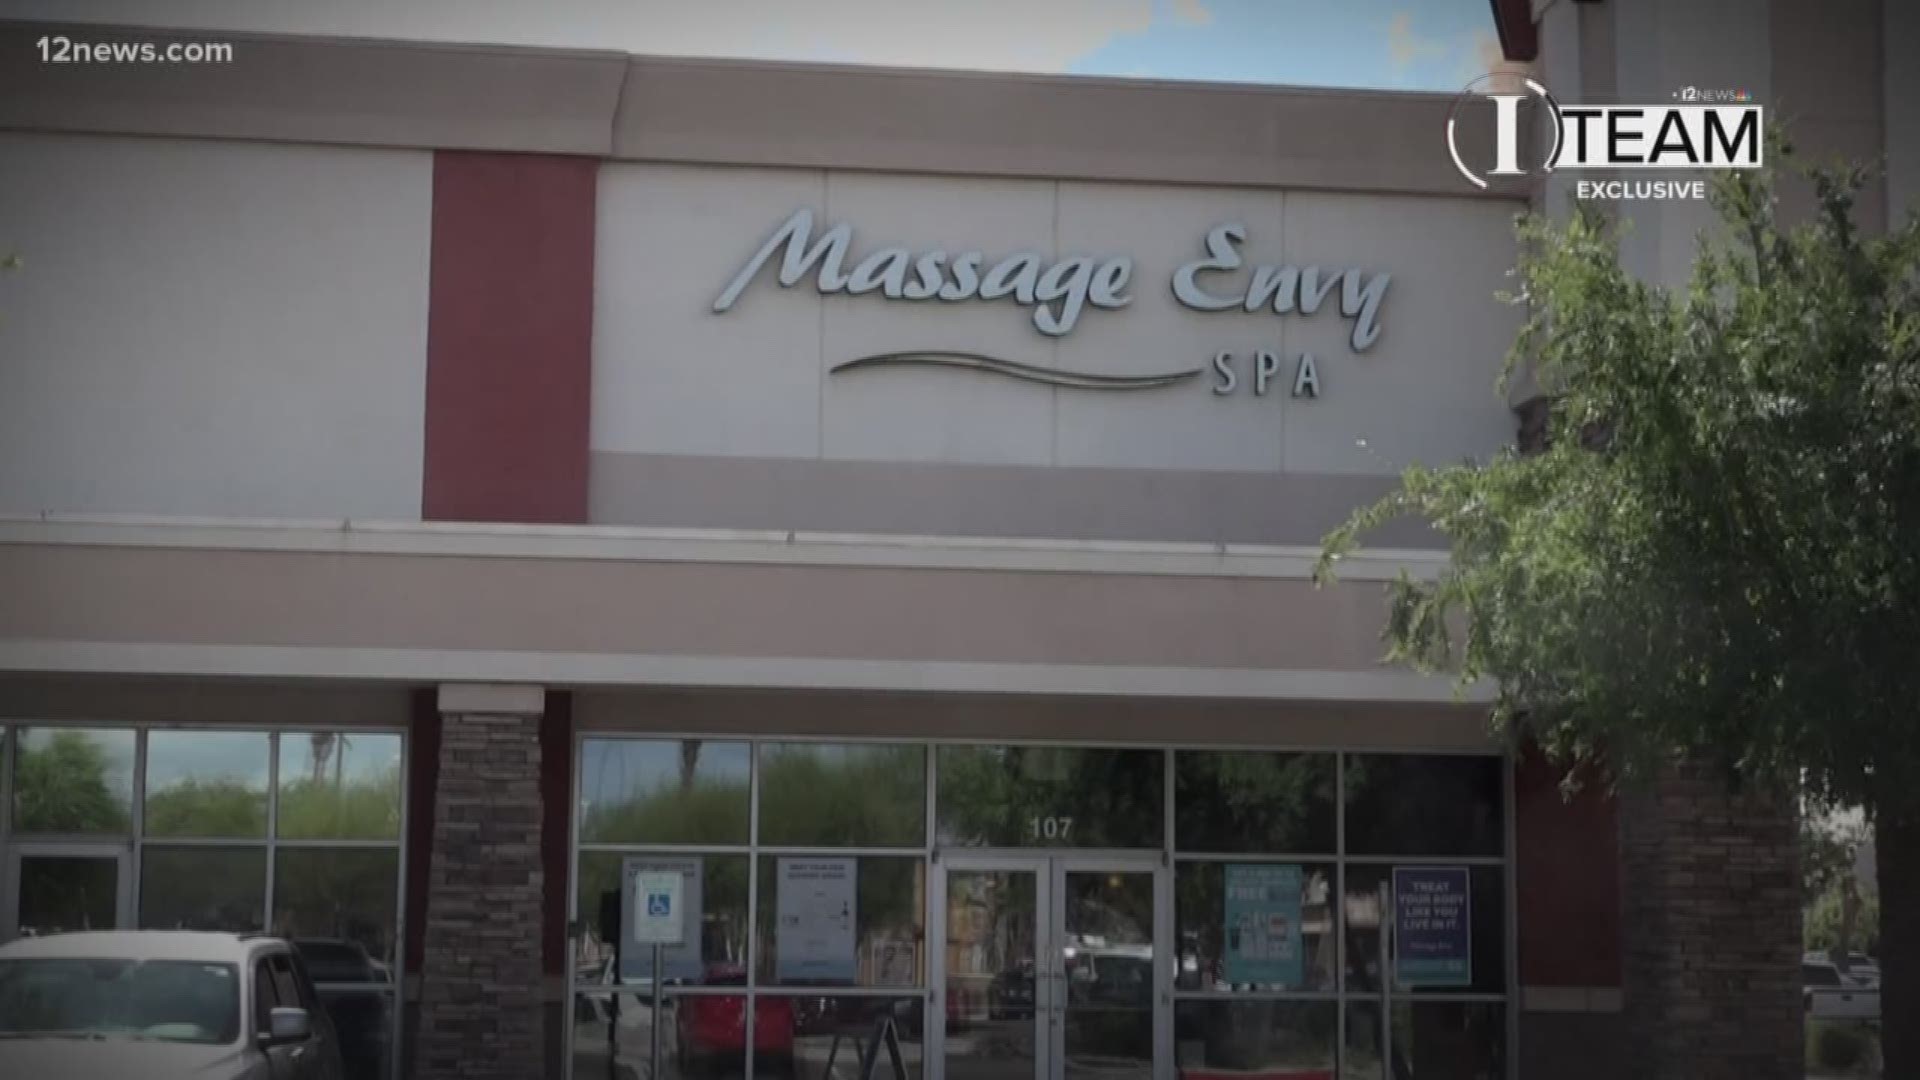 Massage Envy has created an extensive safety plan, but seven of the alleged incidents were reported in the past year. Some advocates say the company can do more.